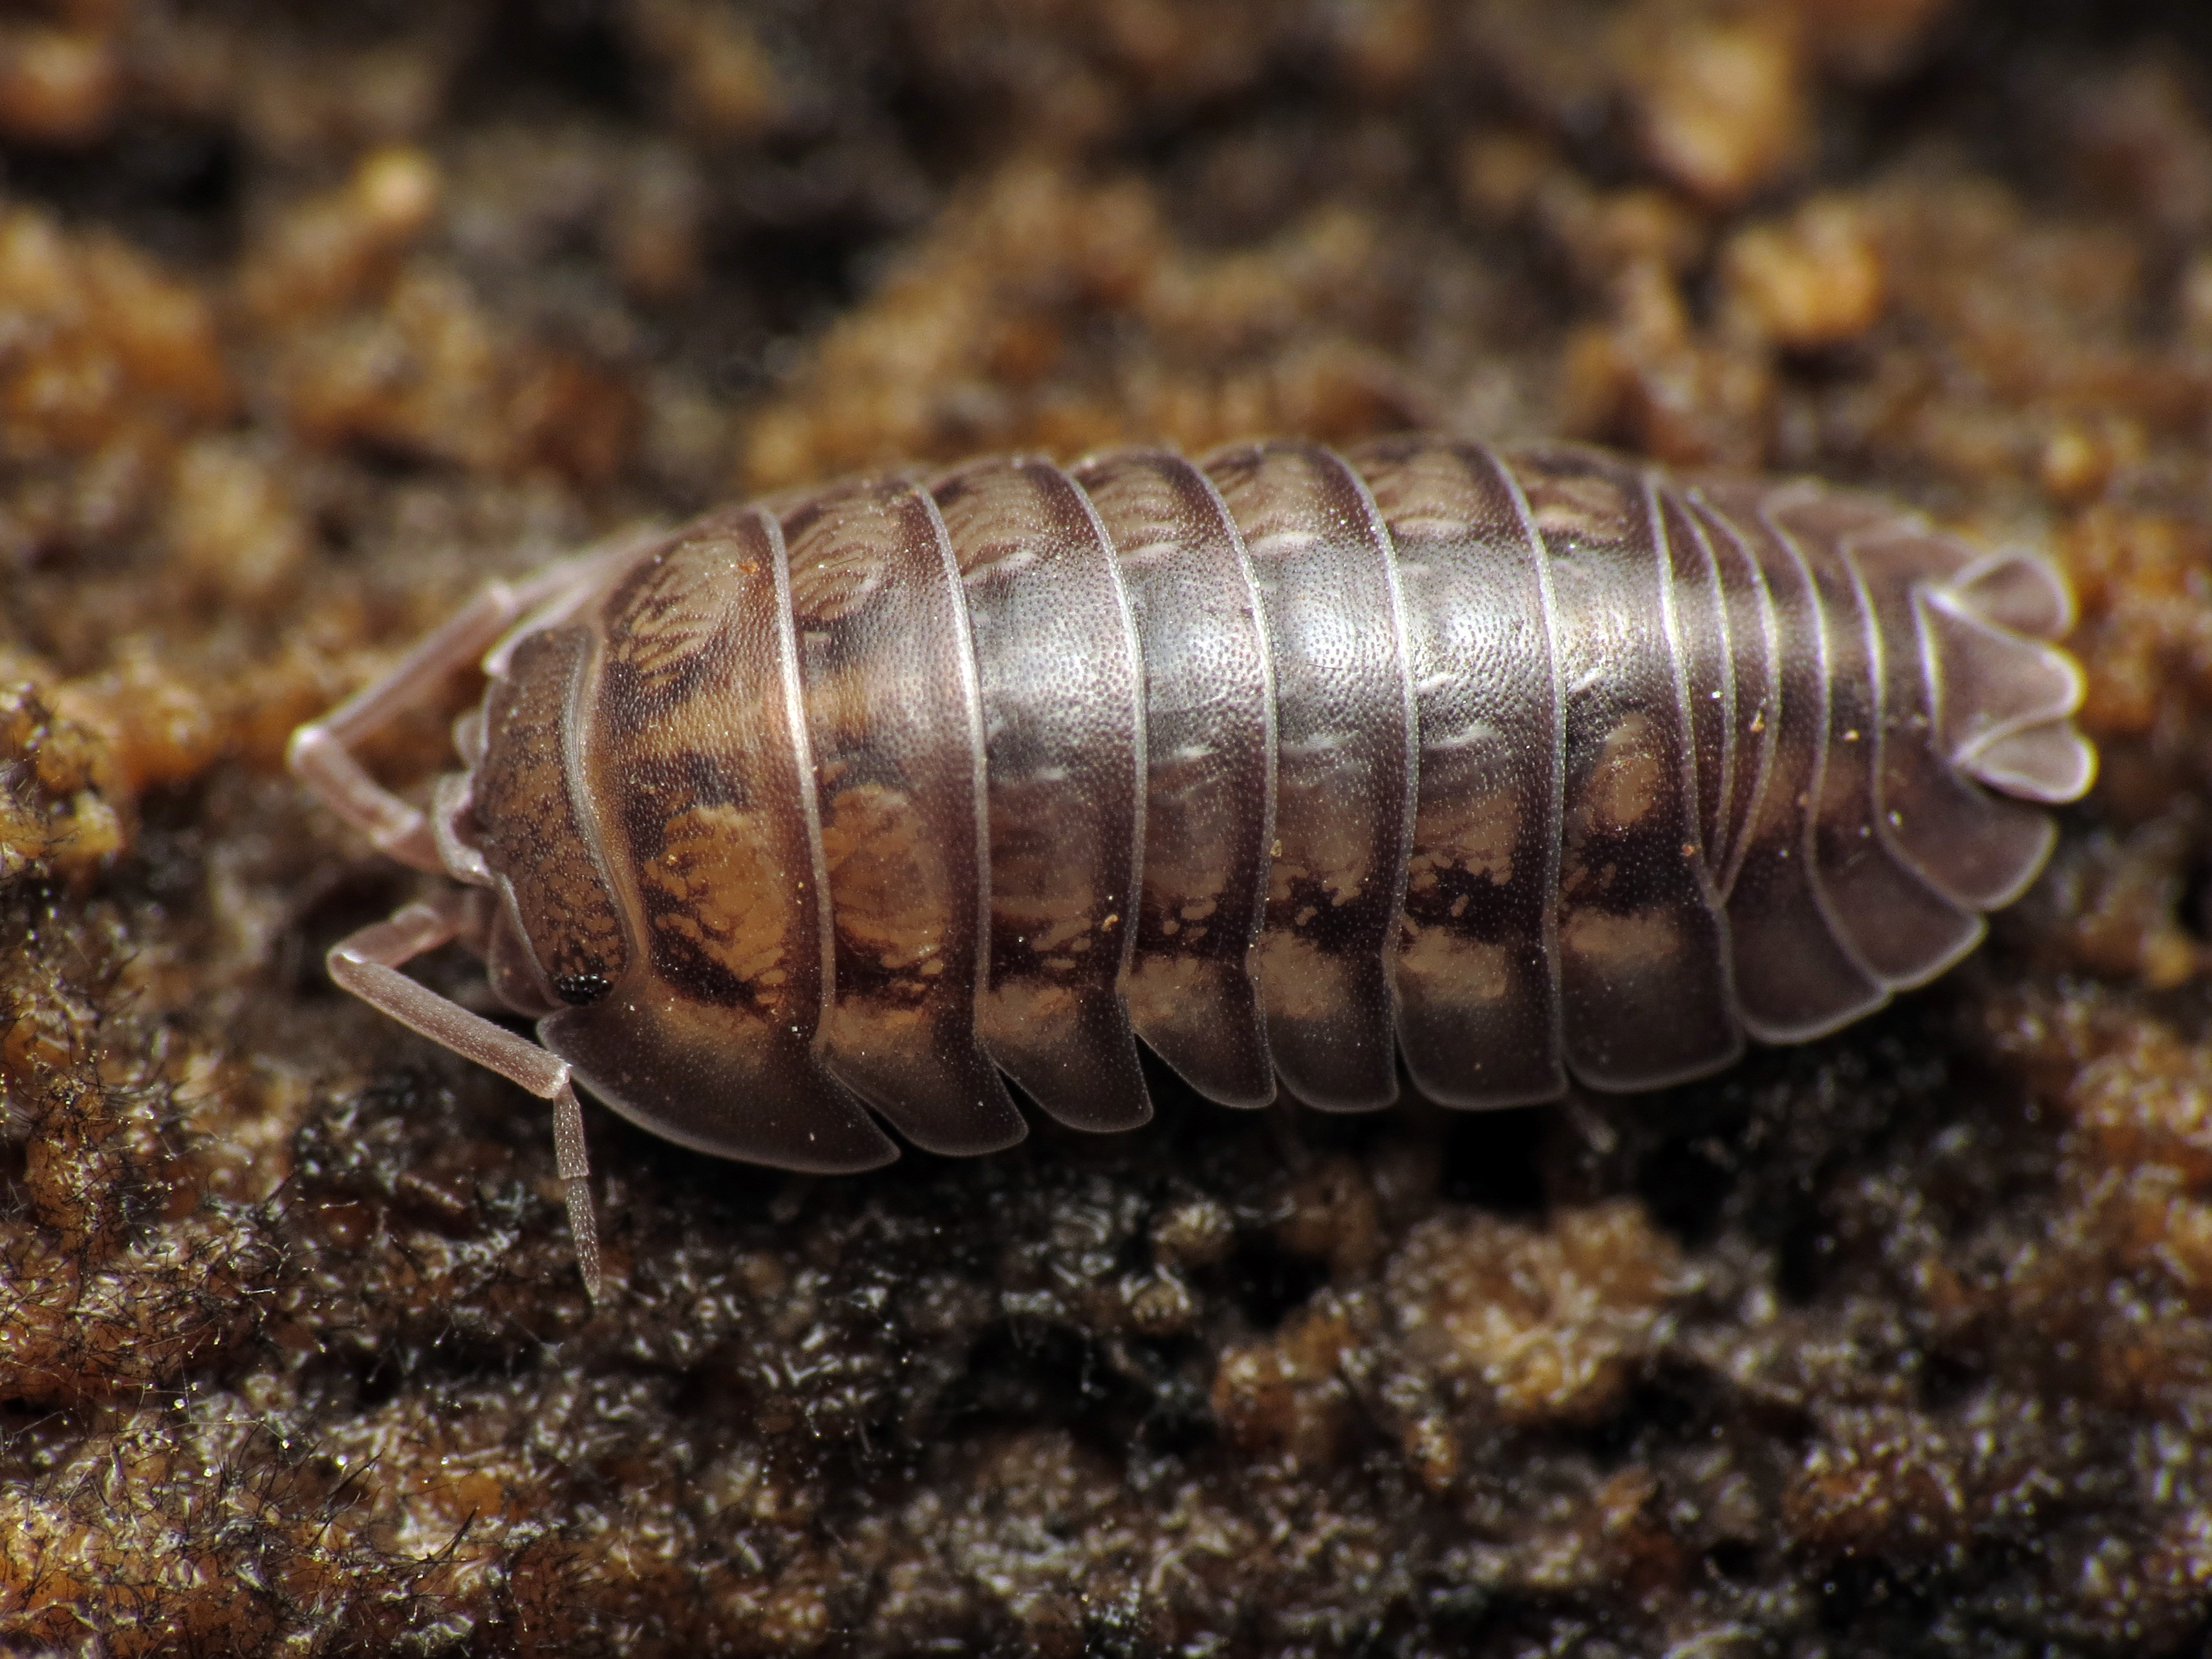 Close up photo of a brown, segmented critter with elliptical, flattened dome-shaped armor. Wood louse, pill bug or roly poly, pick up a piece of wood that’s been in the dirt for a while and there she’ll be, with a bunch of her closest friends and relations.